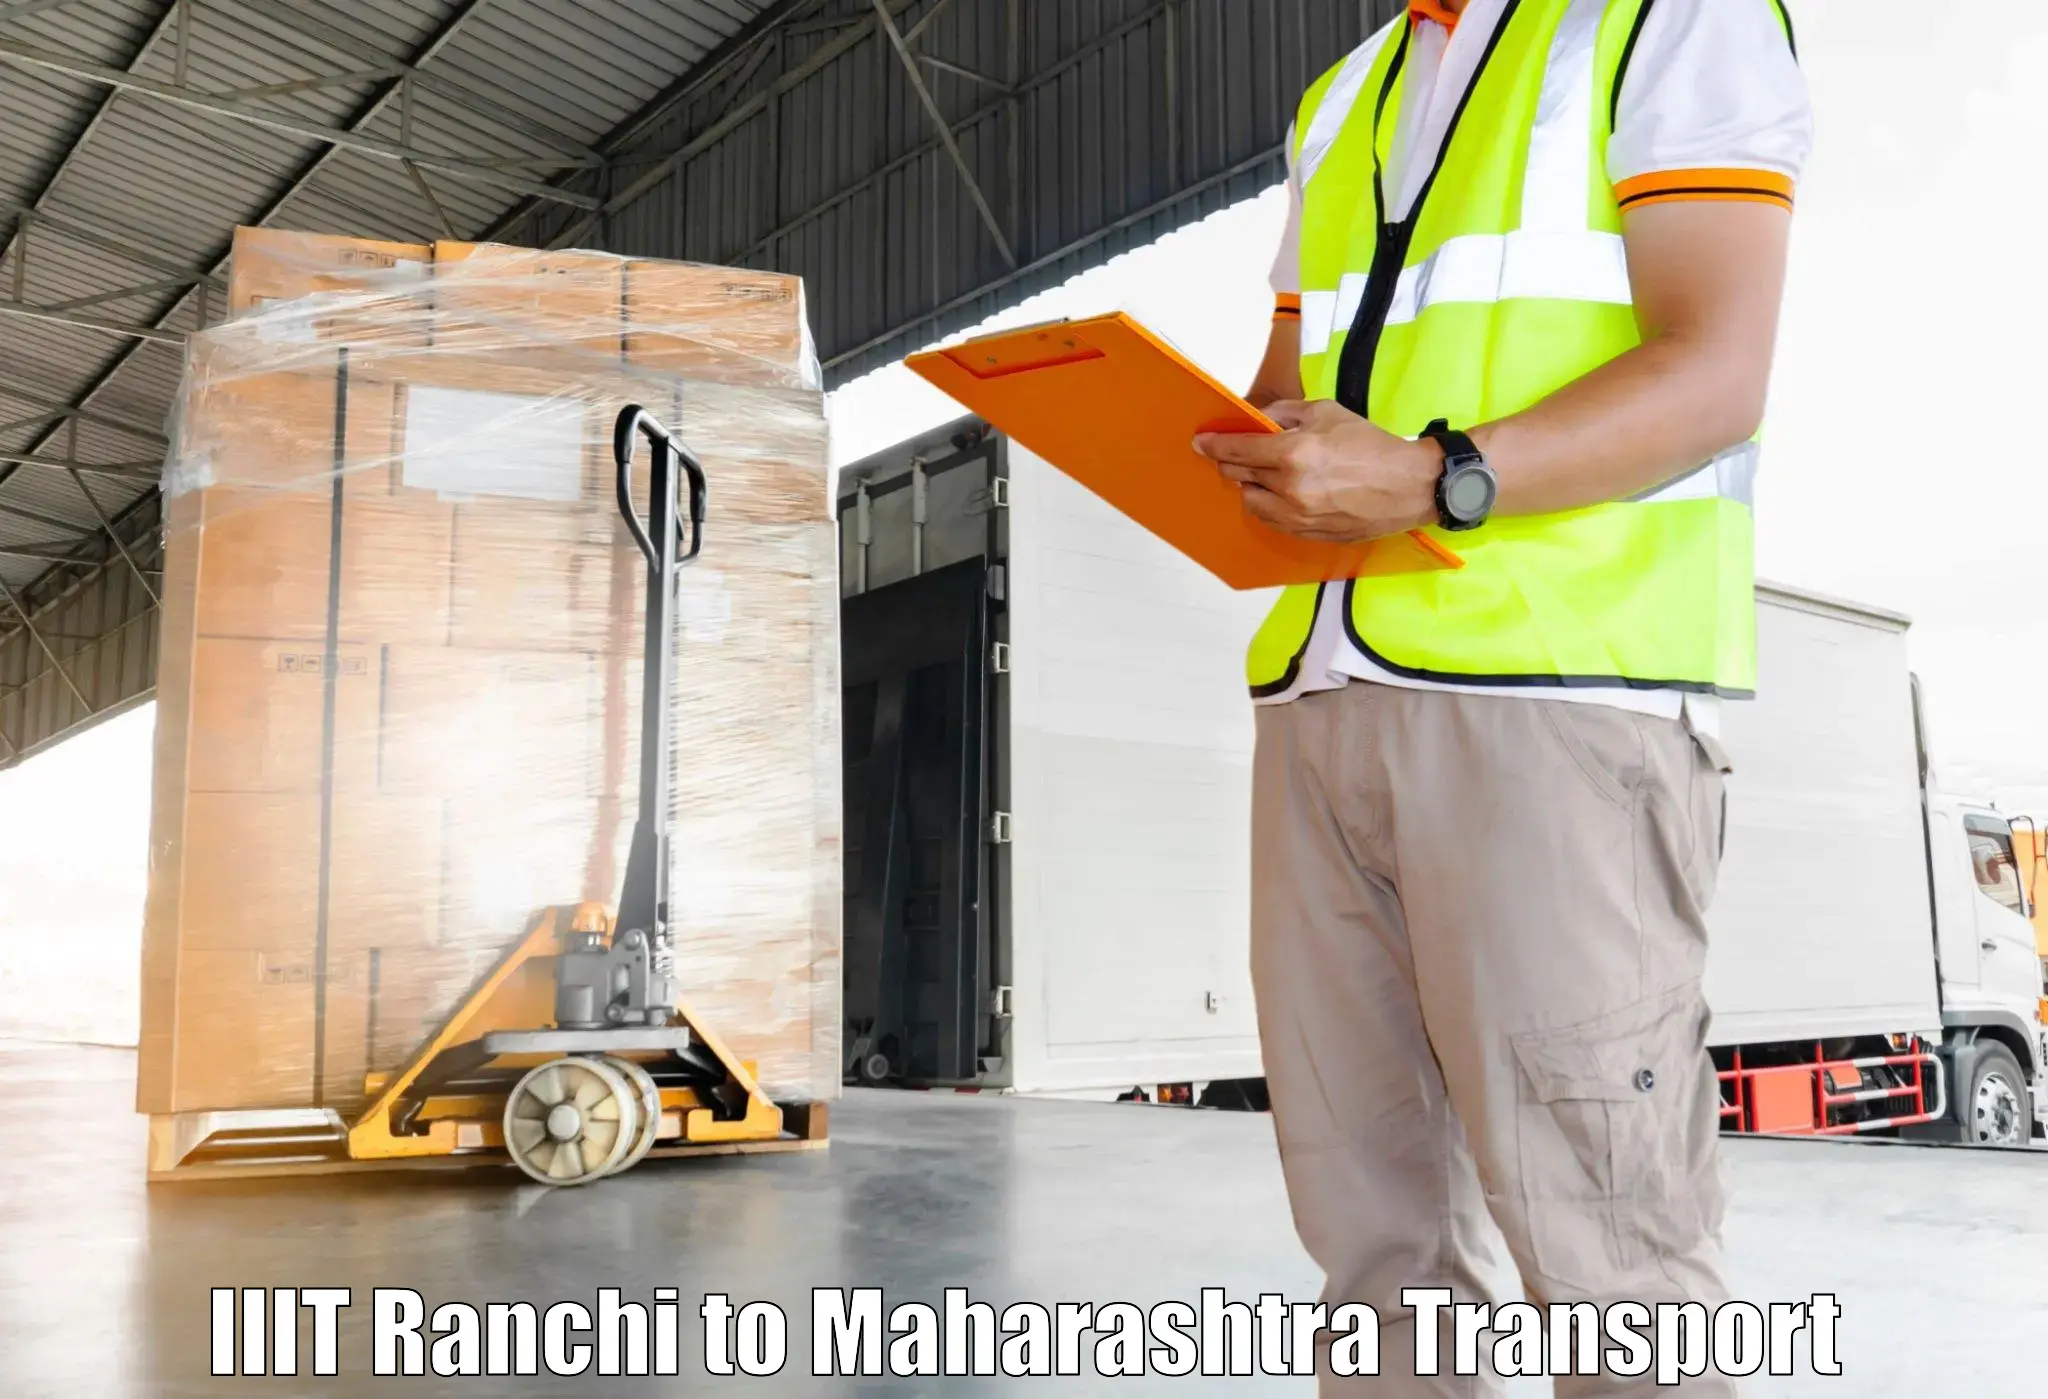 Domestic transport services IIIT Ranchi to Jalna